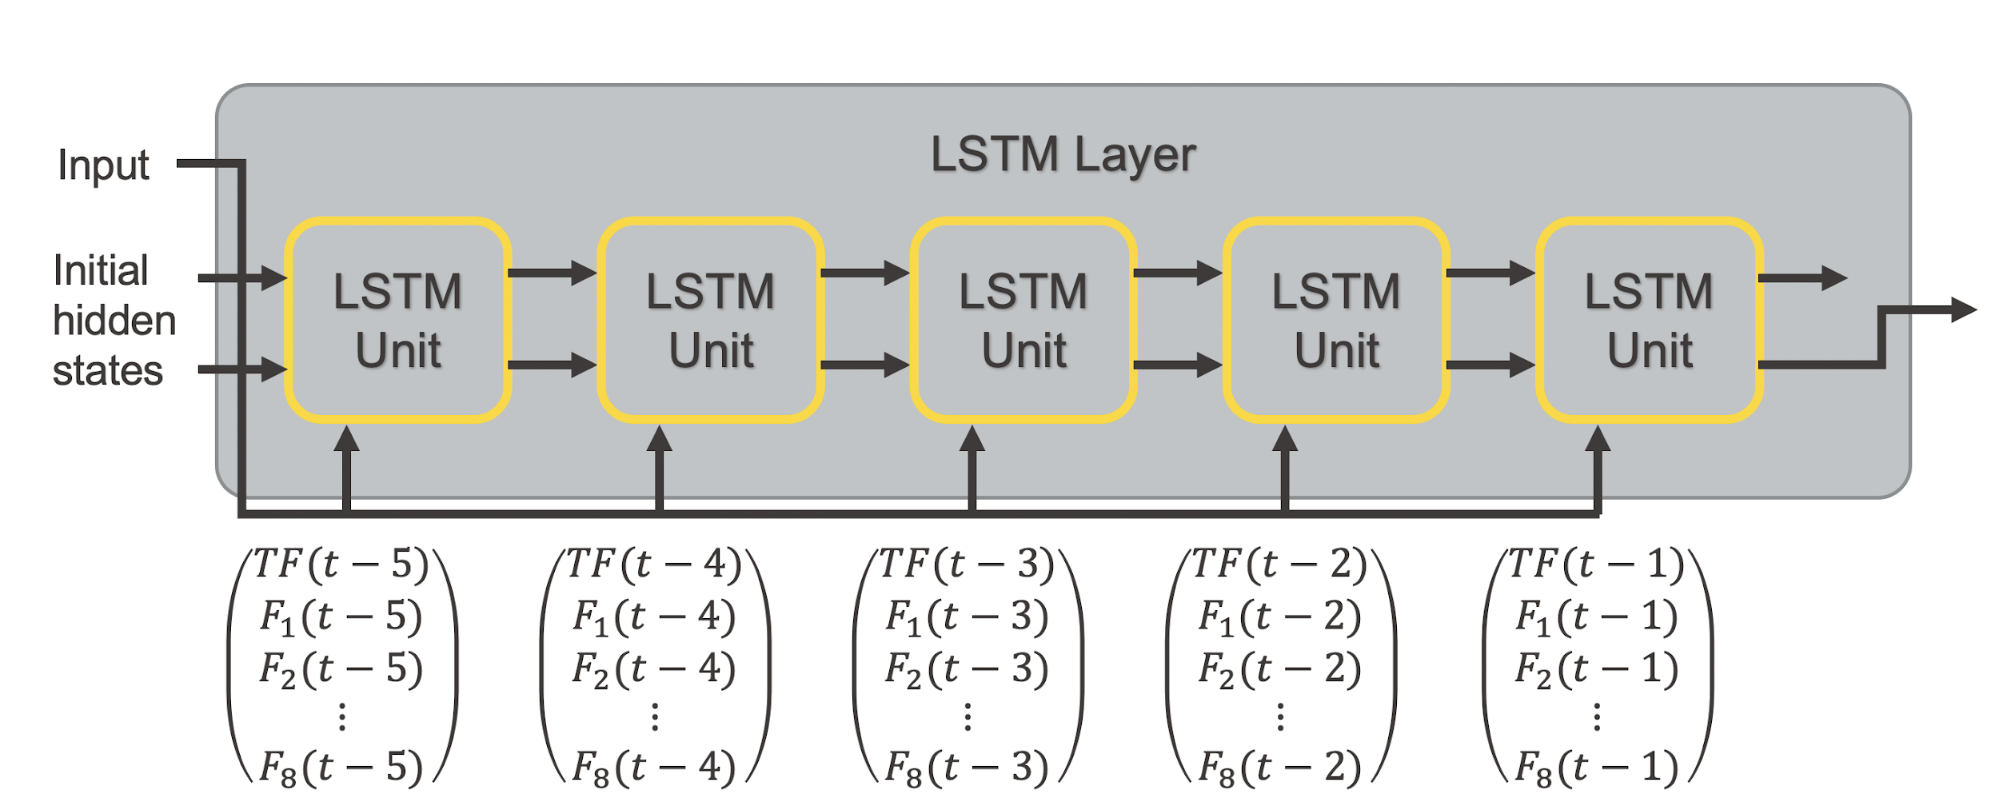 Multivariate Time Series Analysis with LSTMs - All Codeless